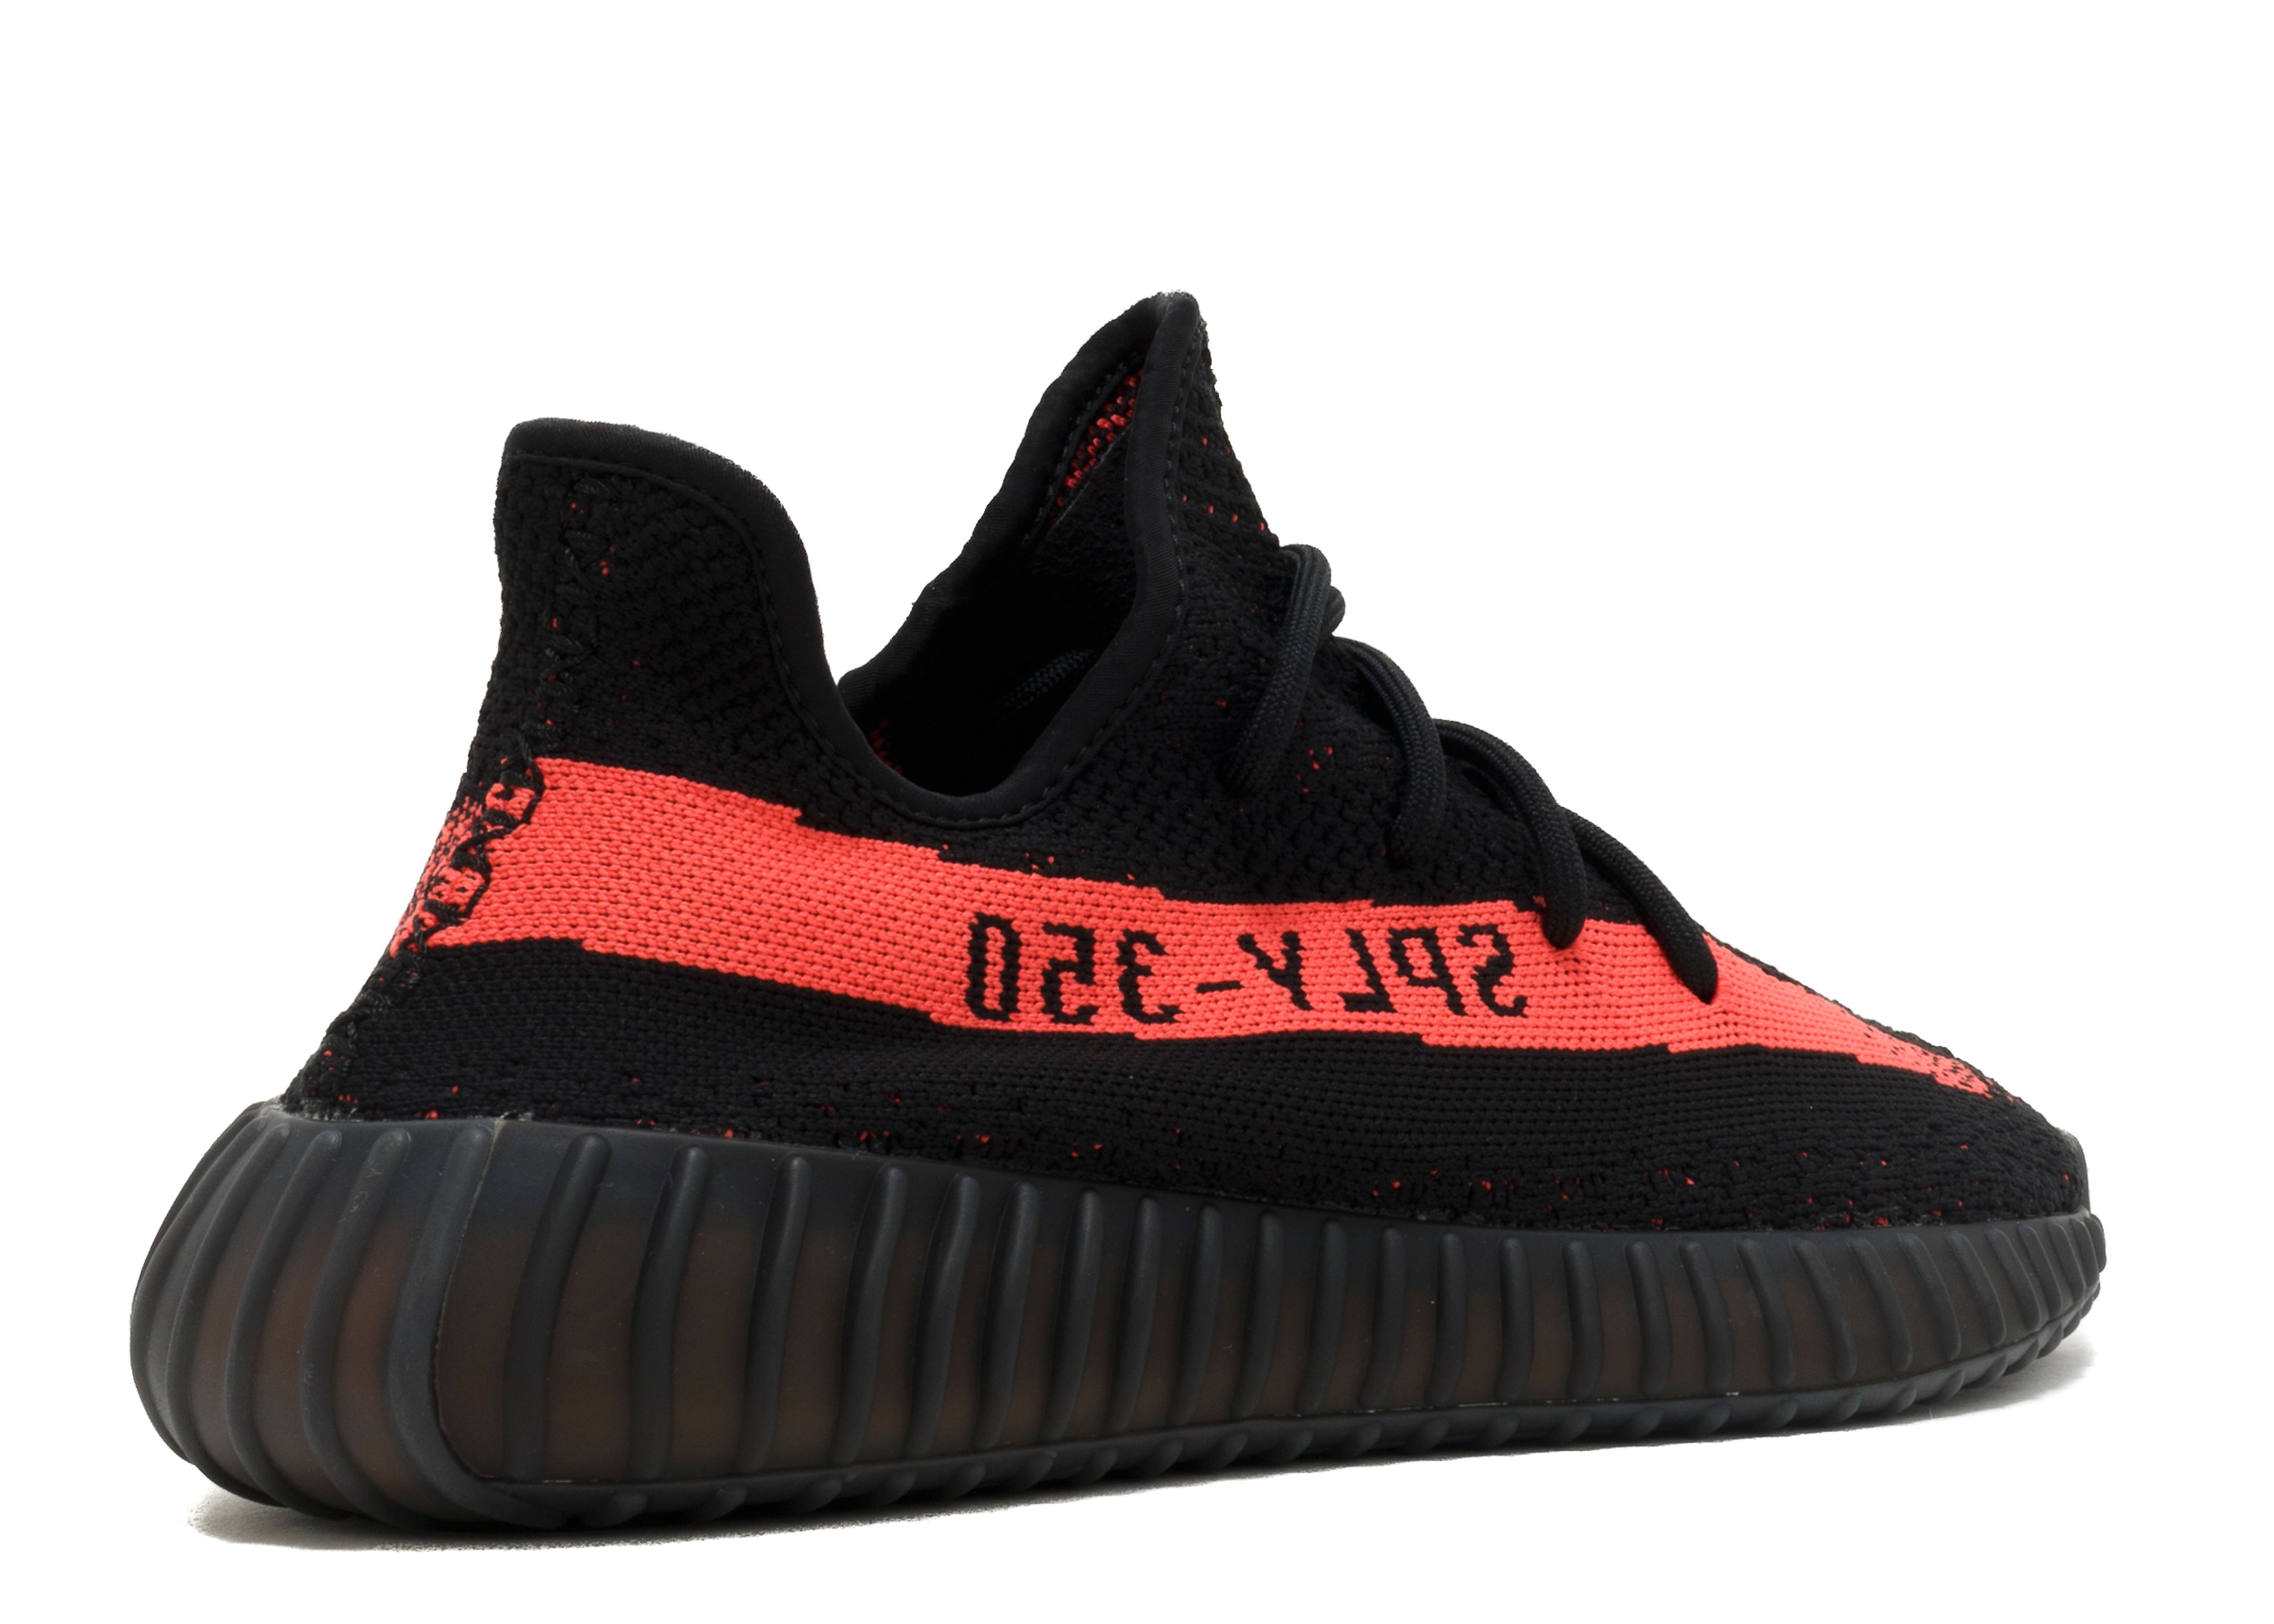 adidas yeezy boost 350 v2 black red bred release date